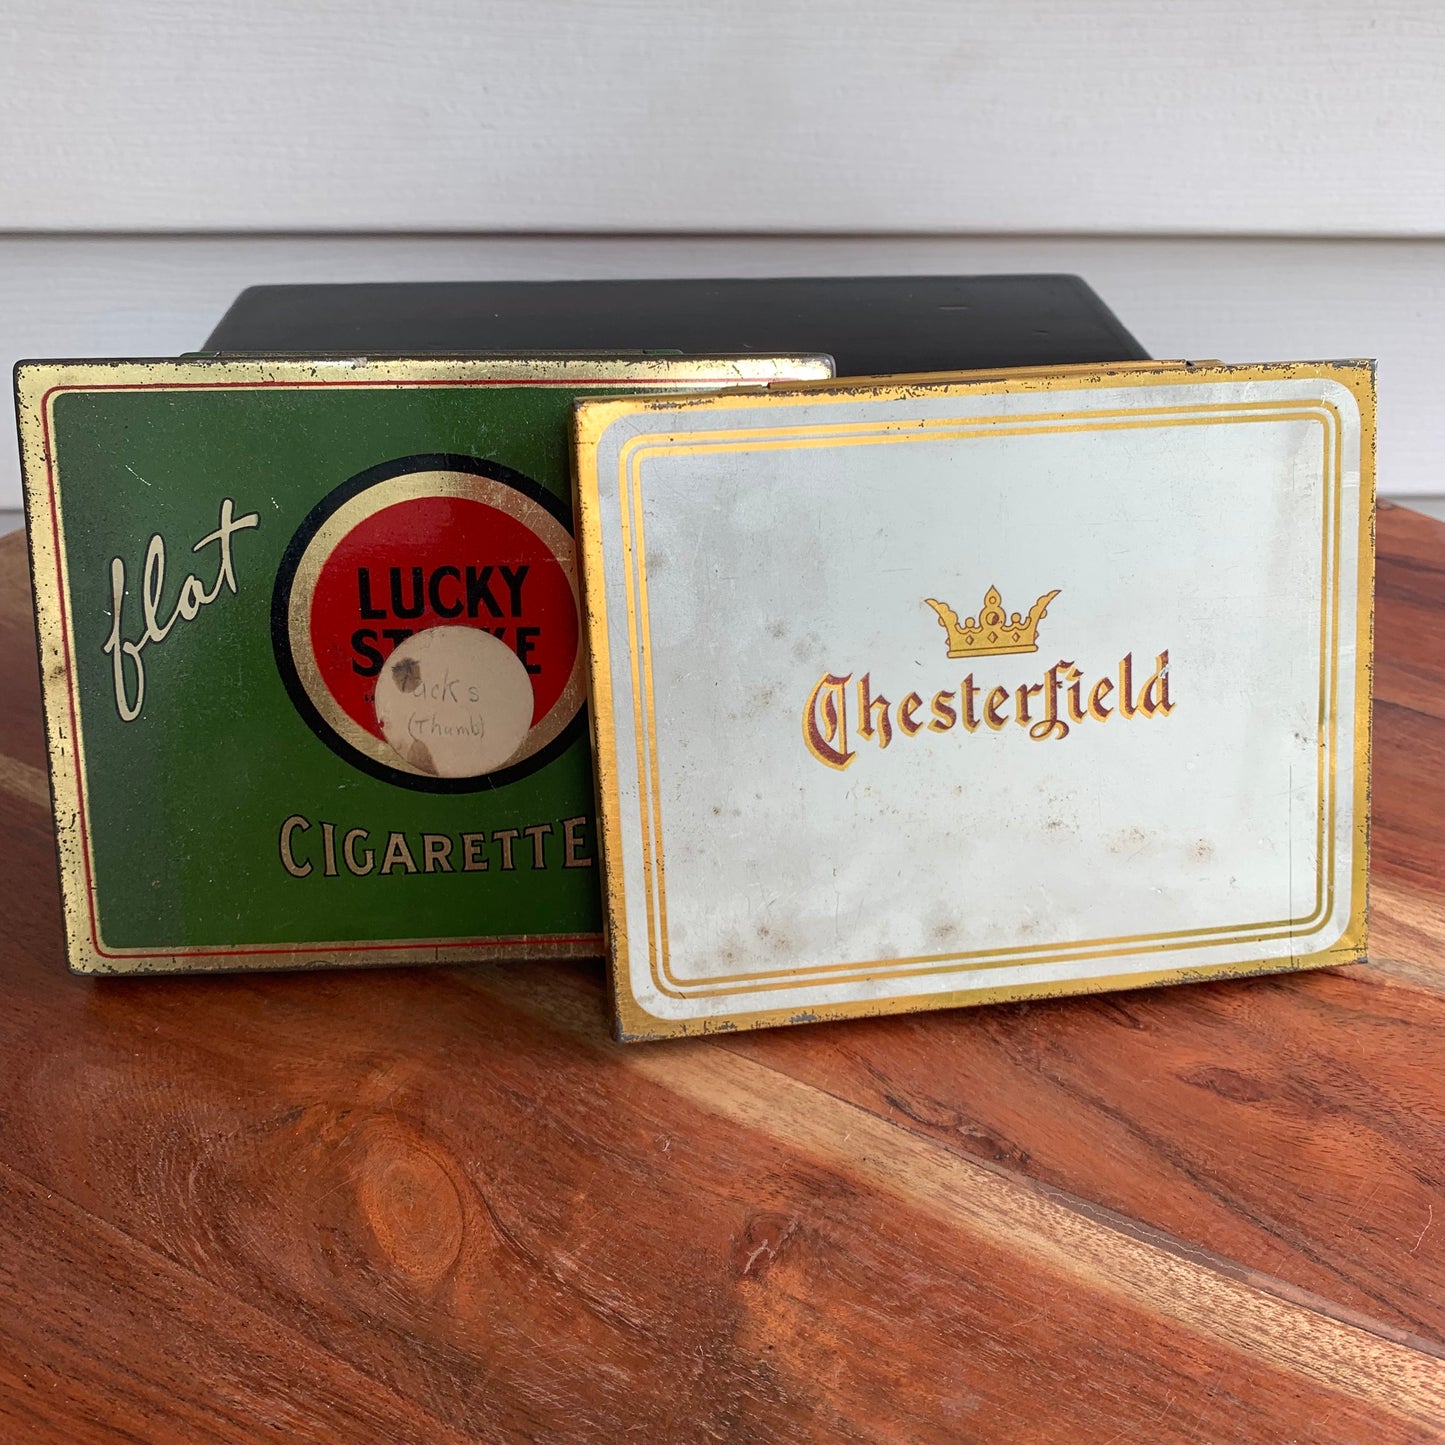 Vintage Lucky Strike Cigarette Tin Flat Fifties "It's Toasted" & Chesterfield Tobacco Tin Boxes